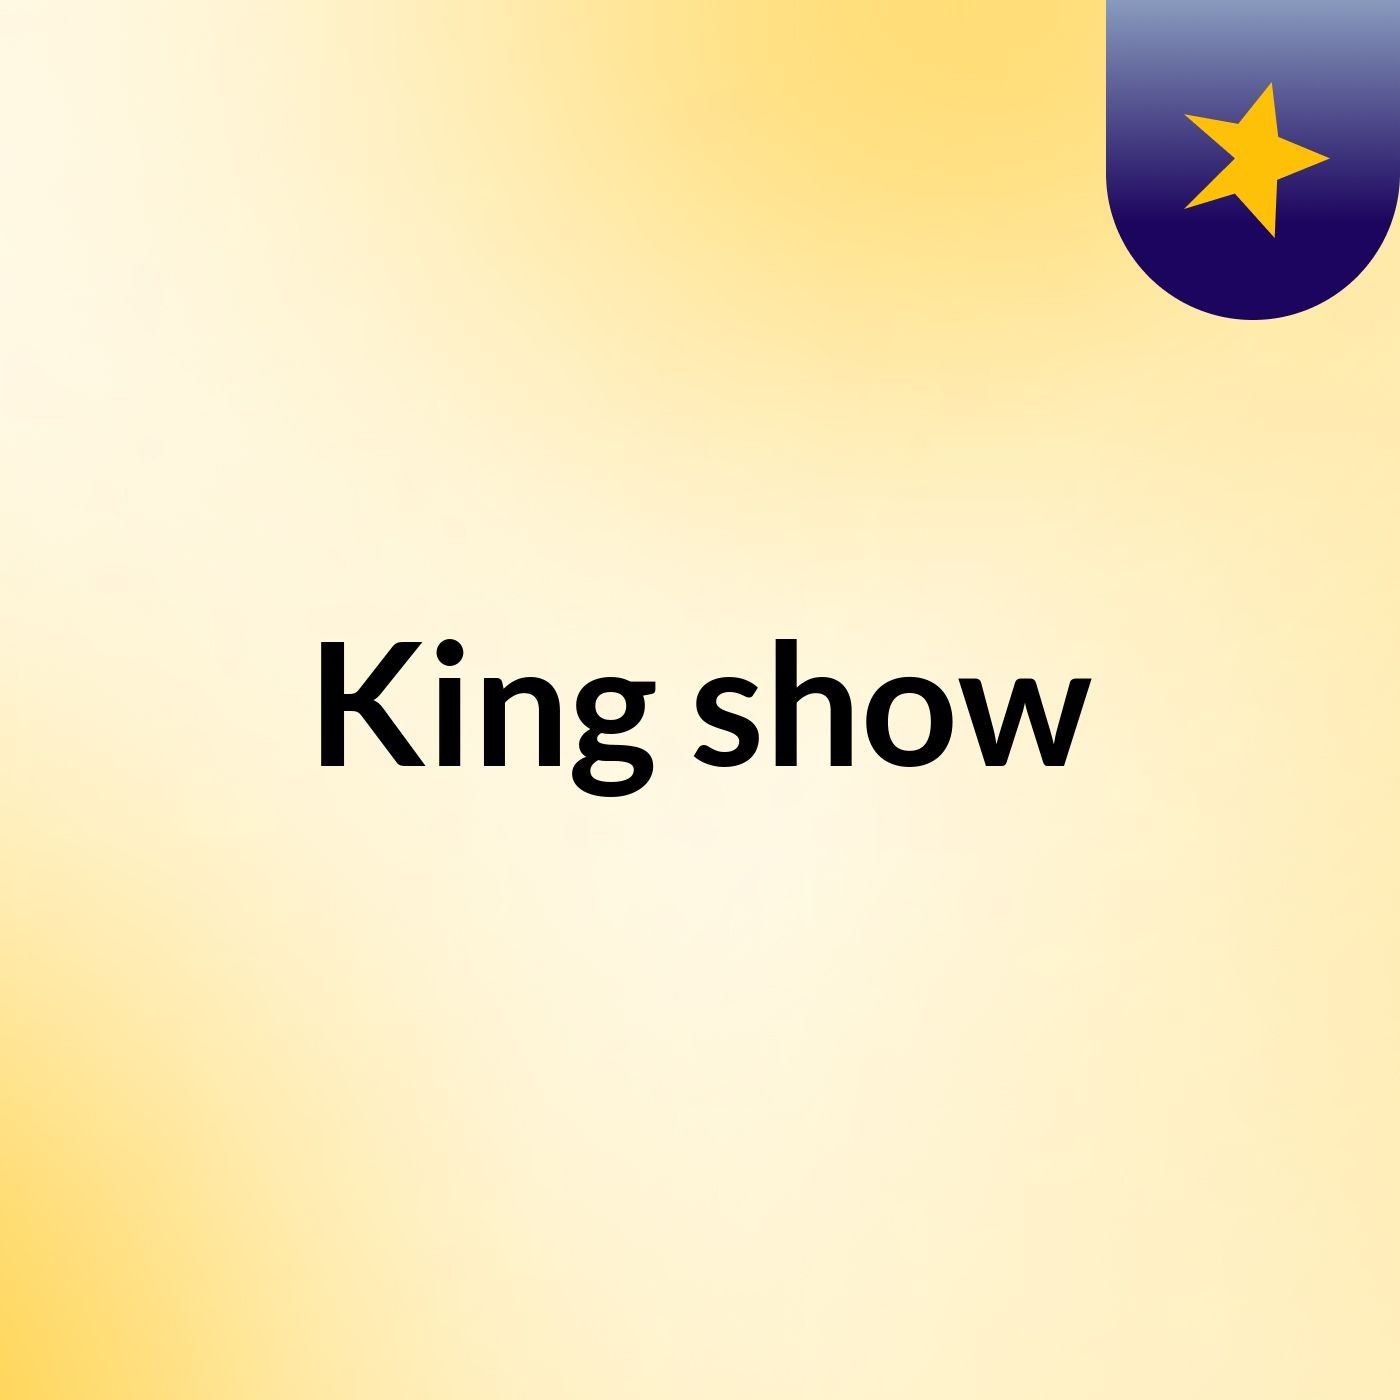 King  show